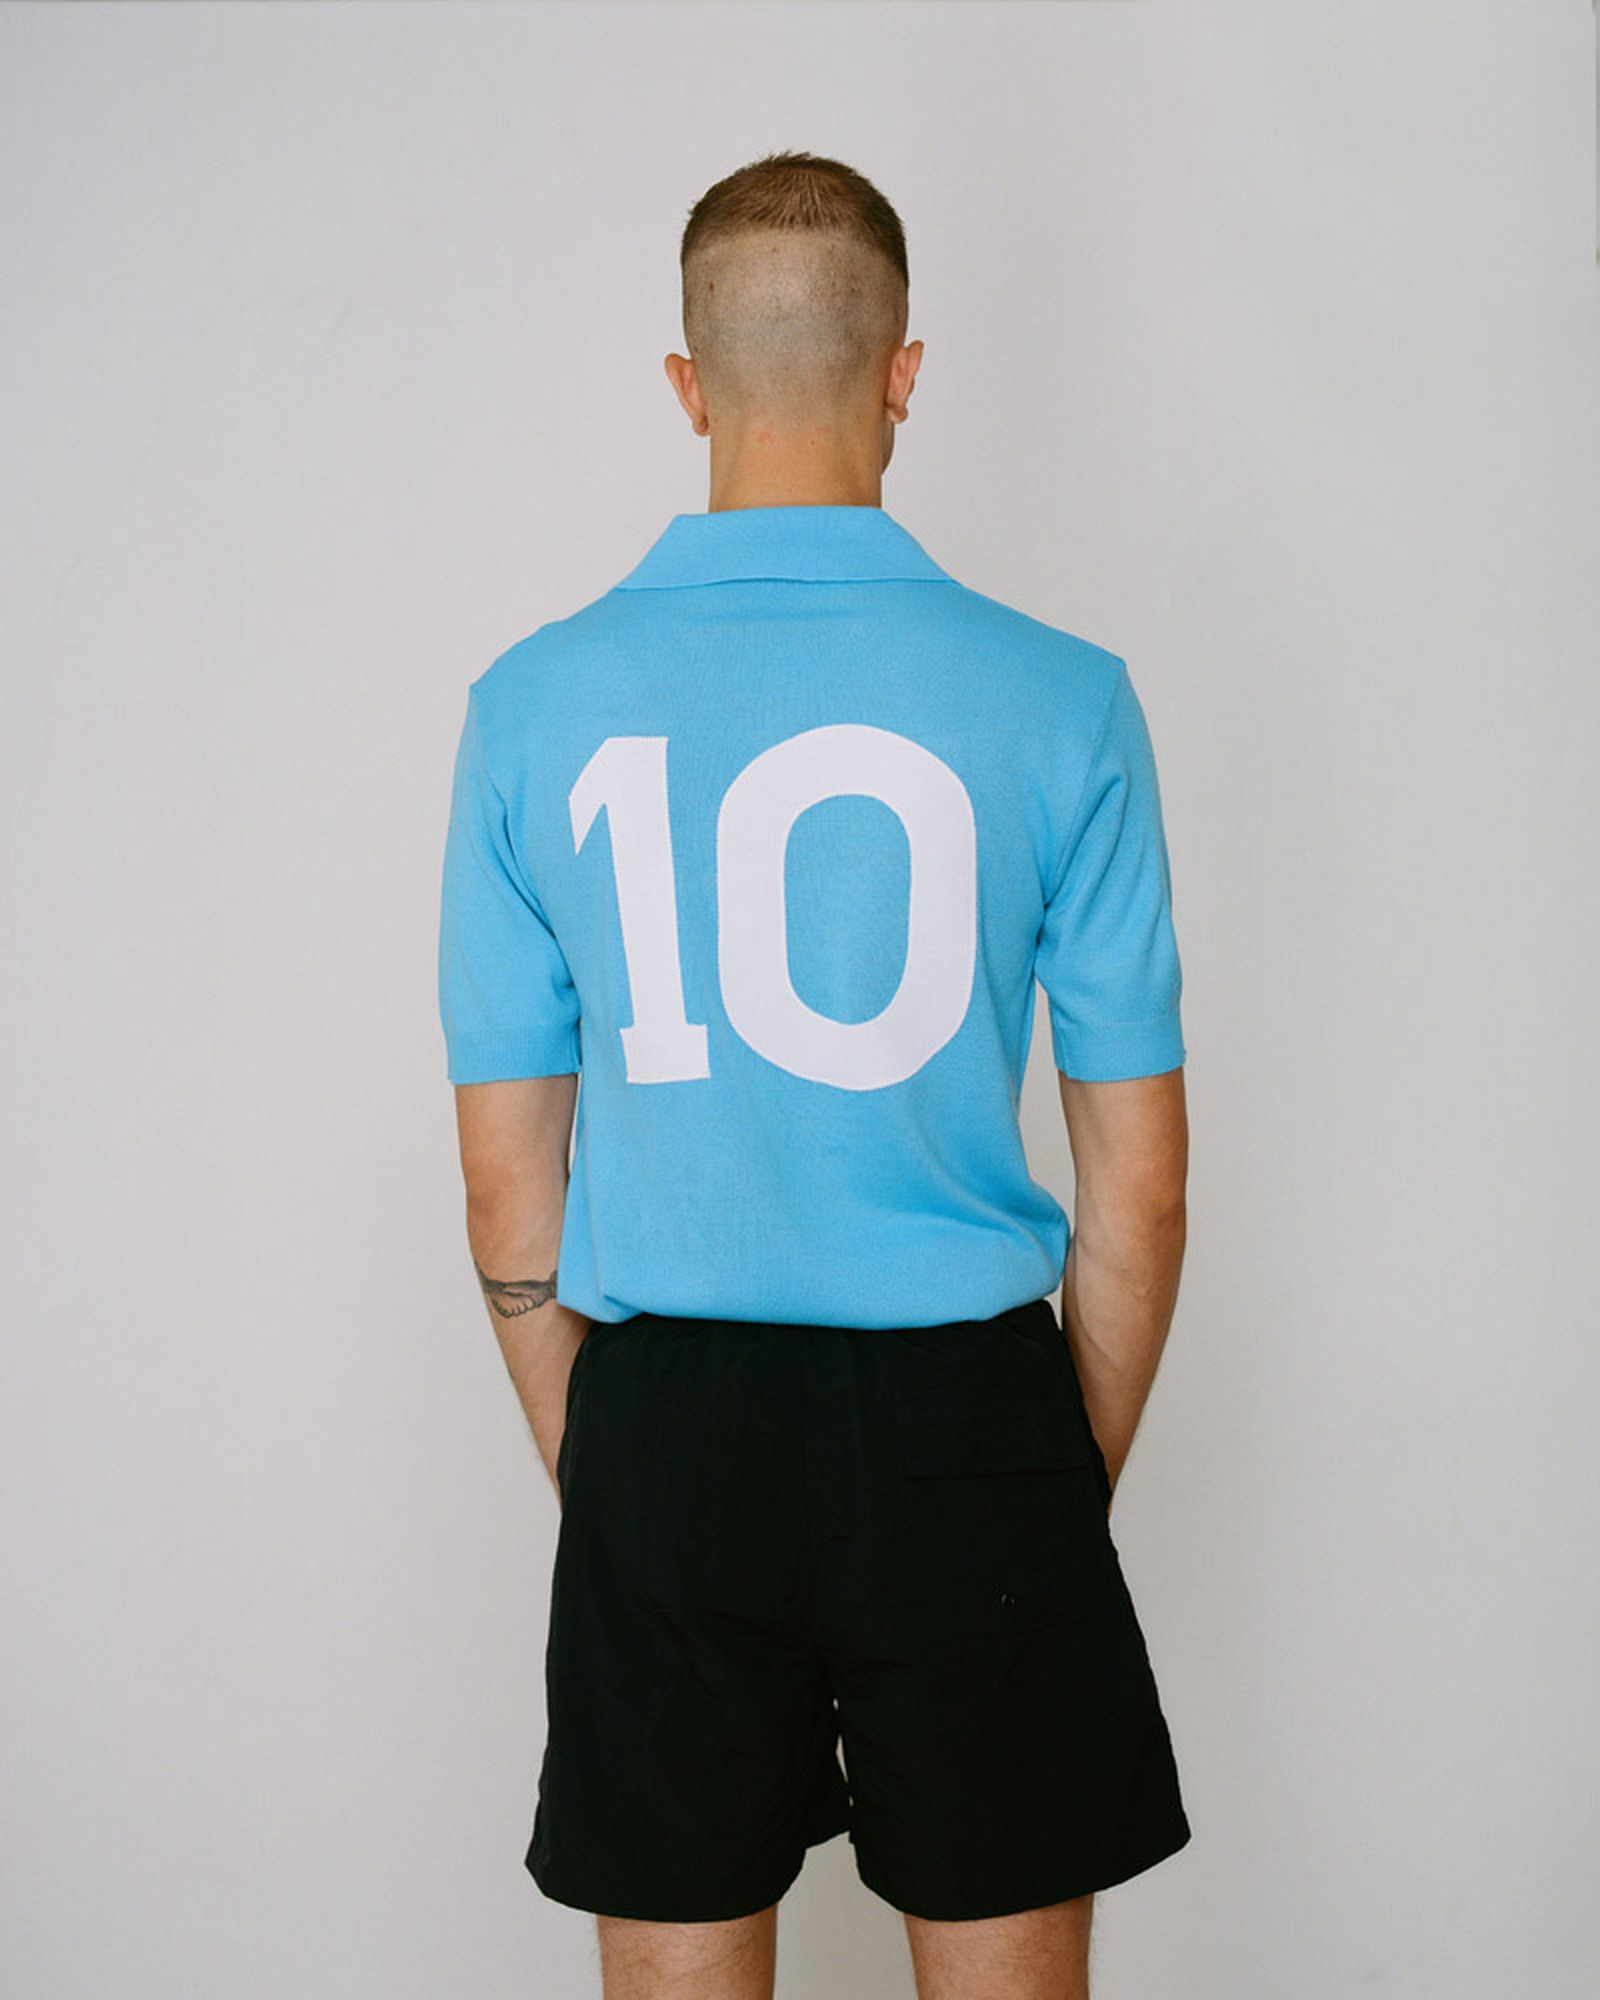 Image of the new Patta x NR No.10 Jersey